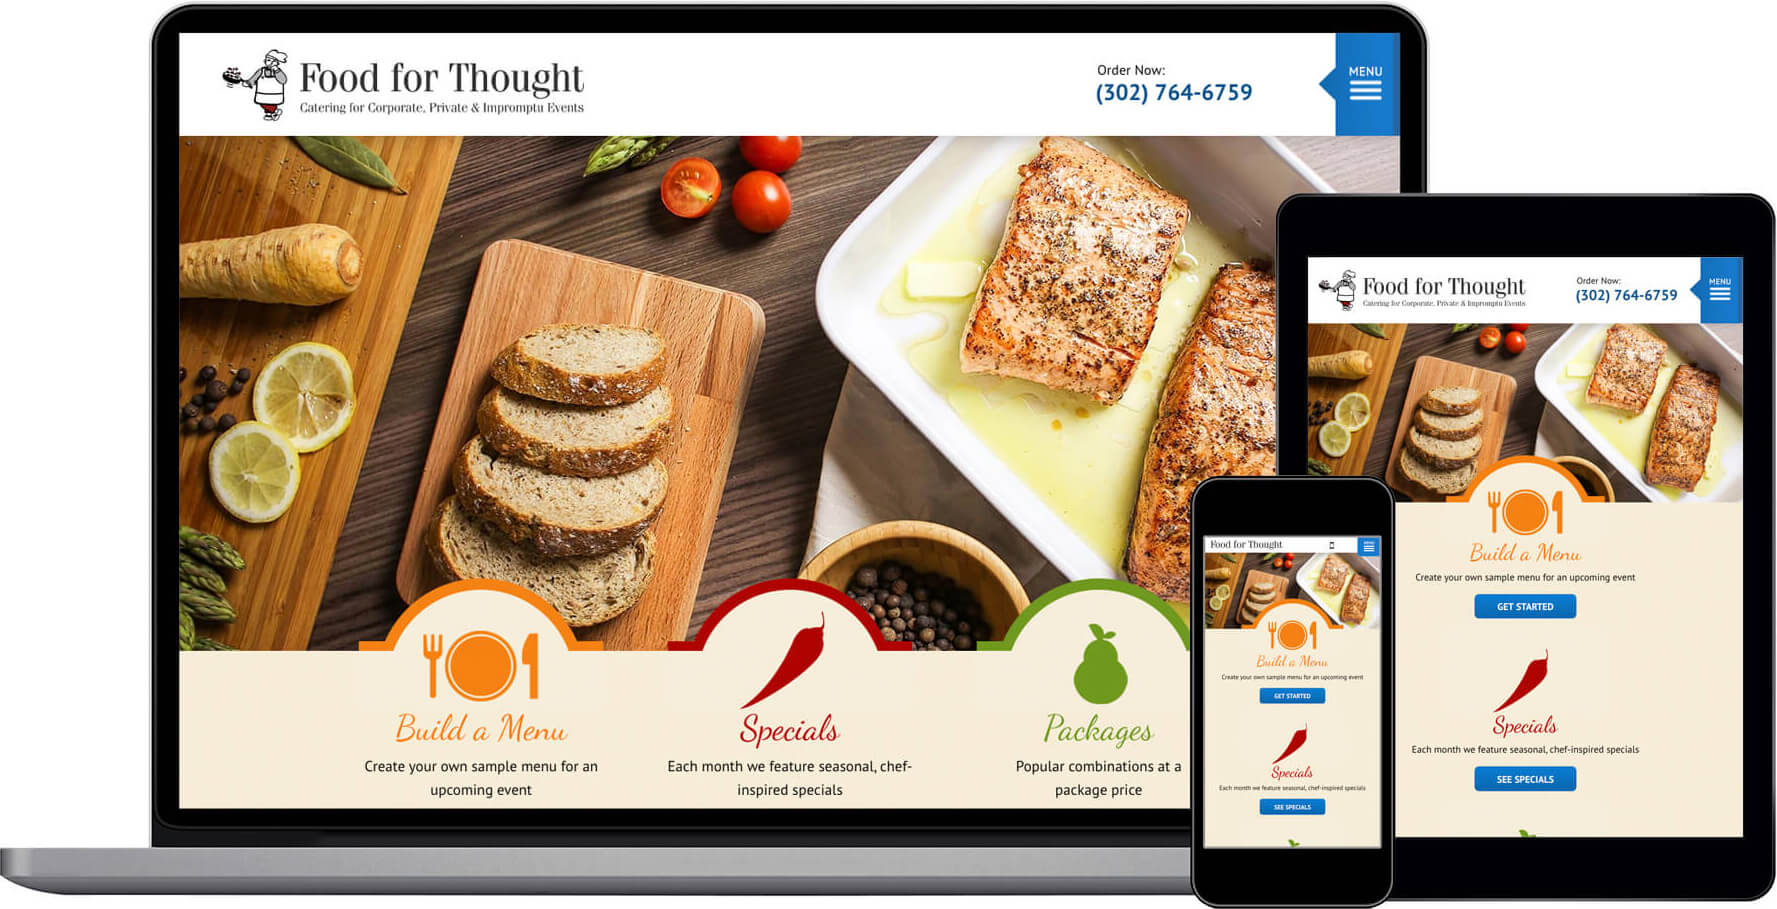 Food for Thought Catering Company Responsive Website Design